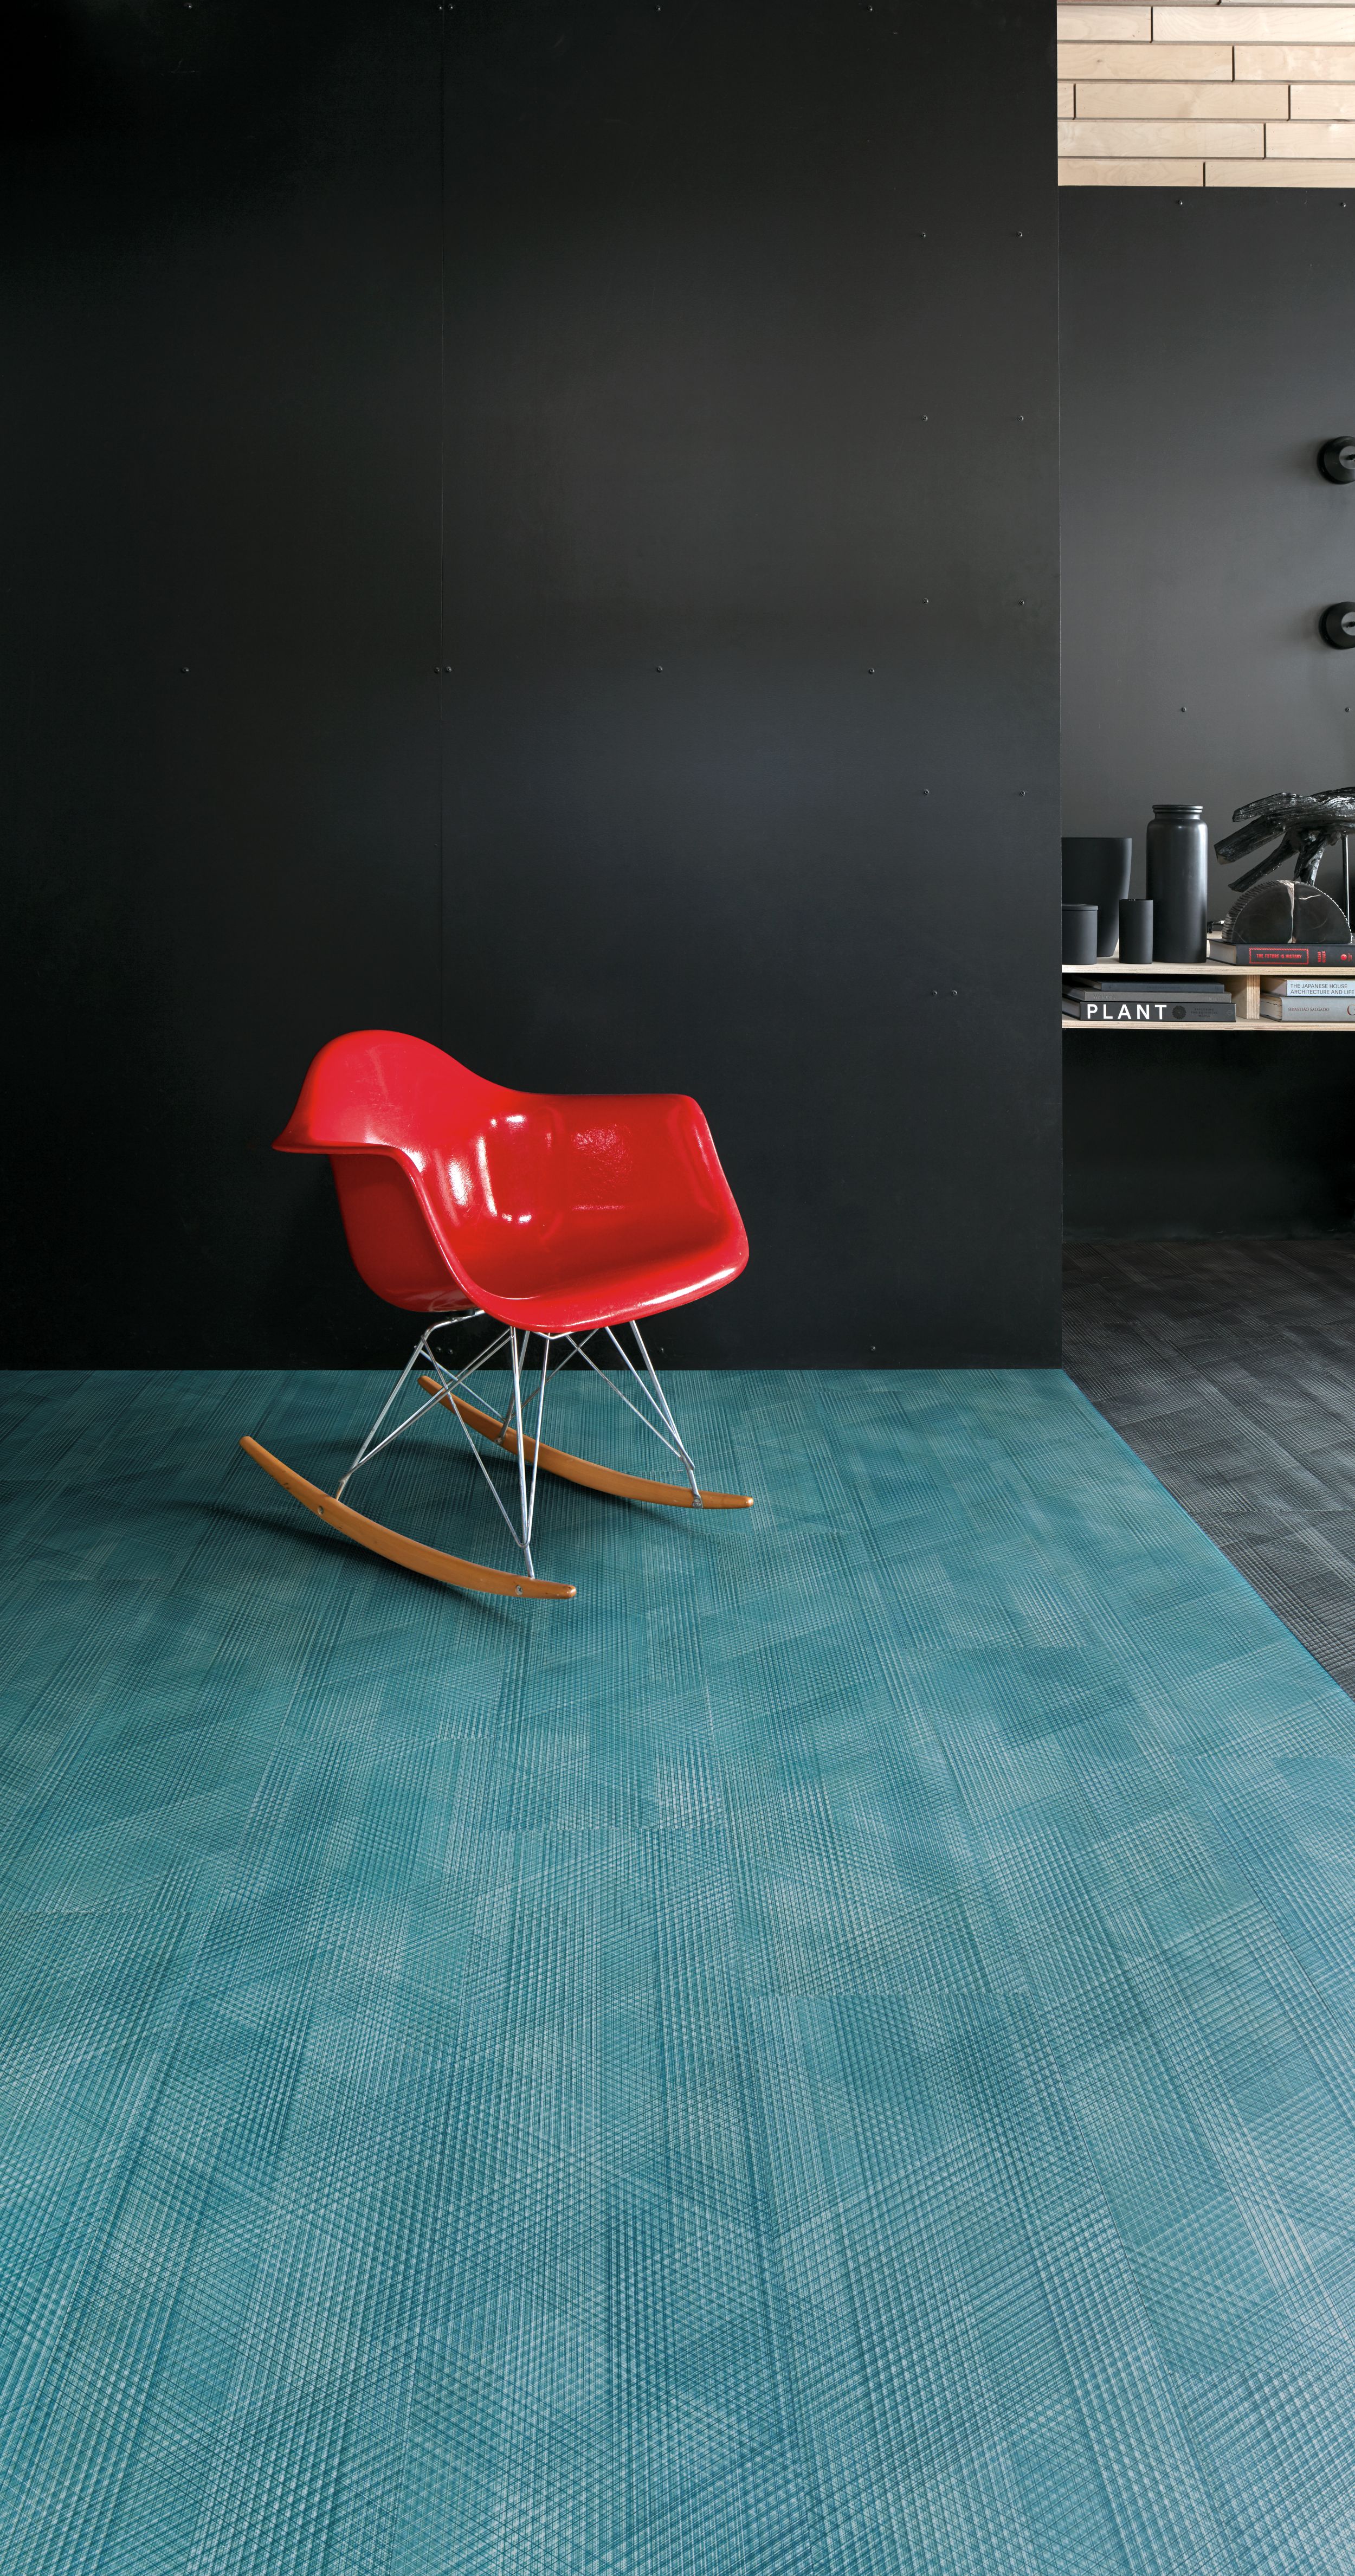 Interface Drawn Lines LVT in common area with red rocking chair  número de imagen 8